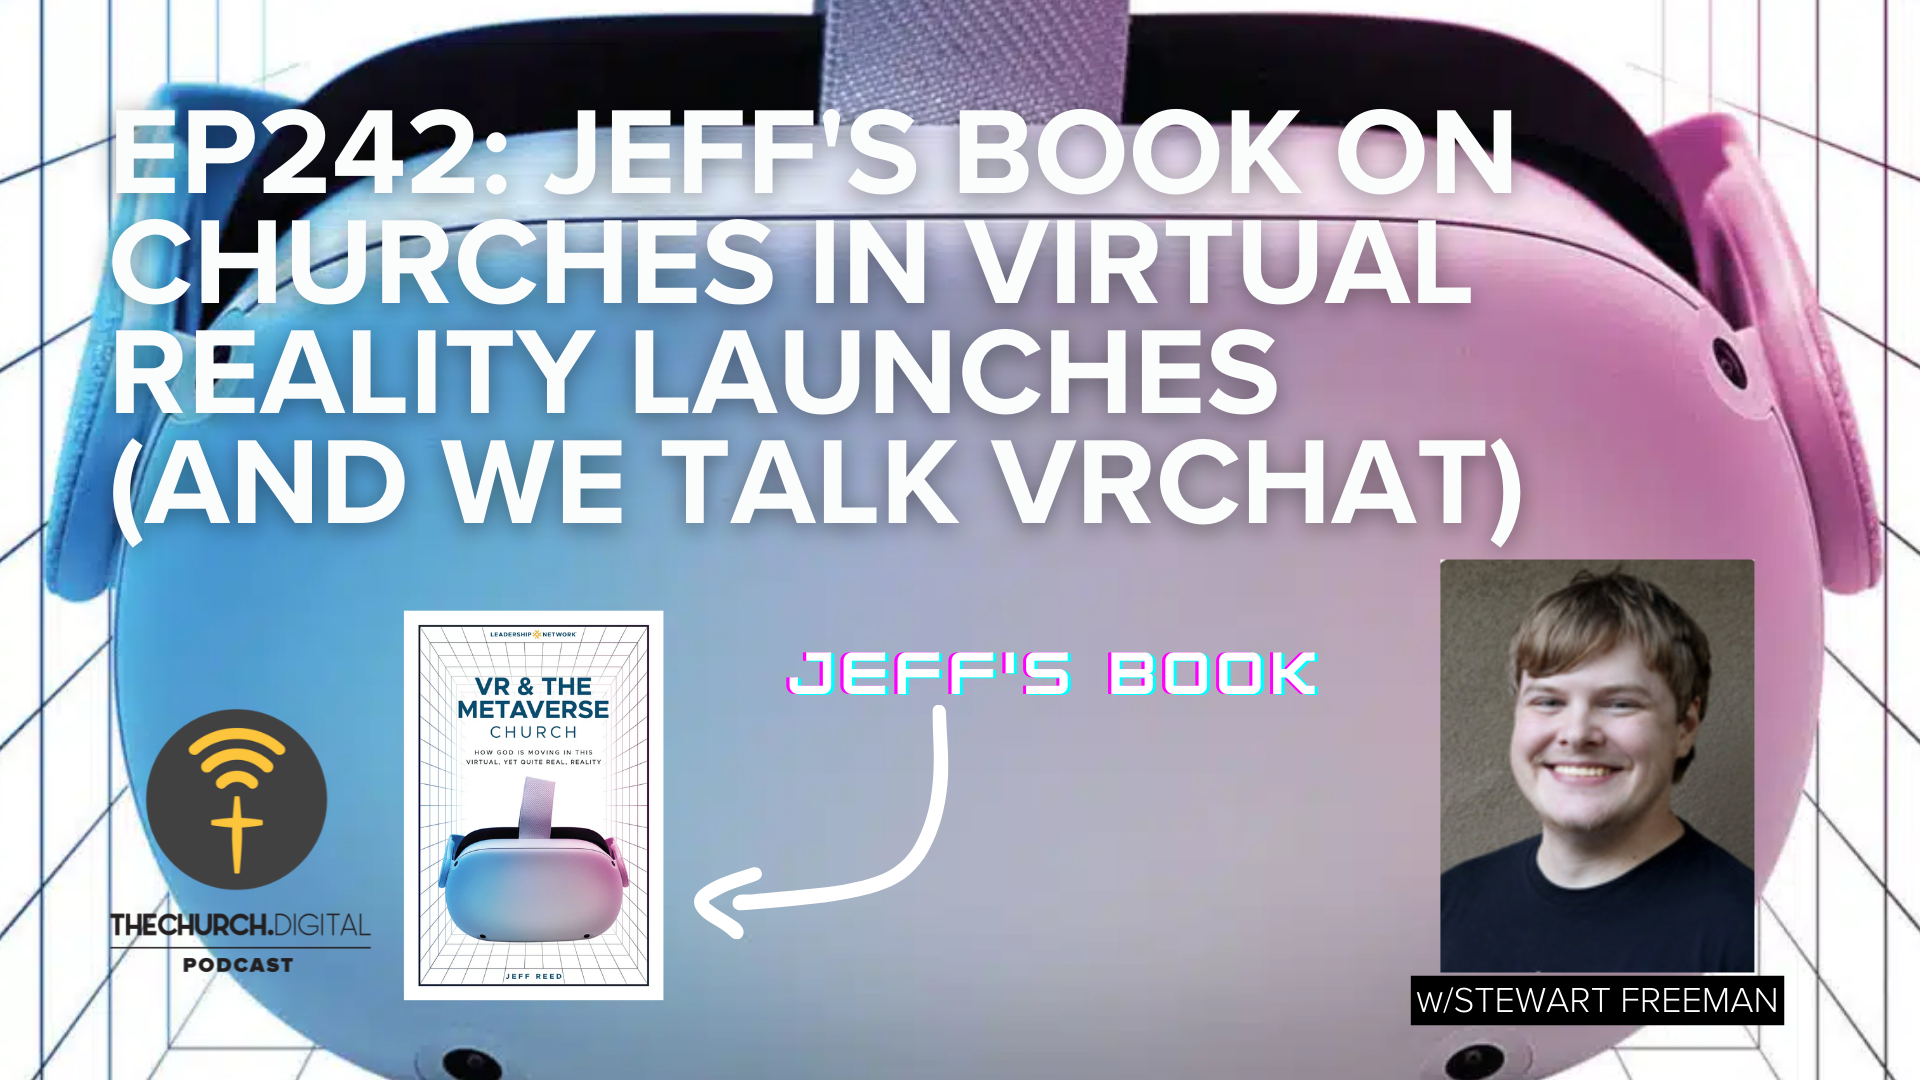 Jeff's Book VR & The Metaverse Church: How God is Moving in This Virtual, Yet Quite Real, Reality